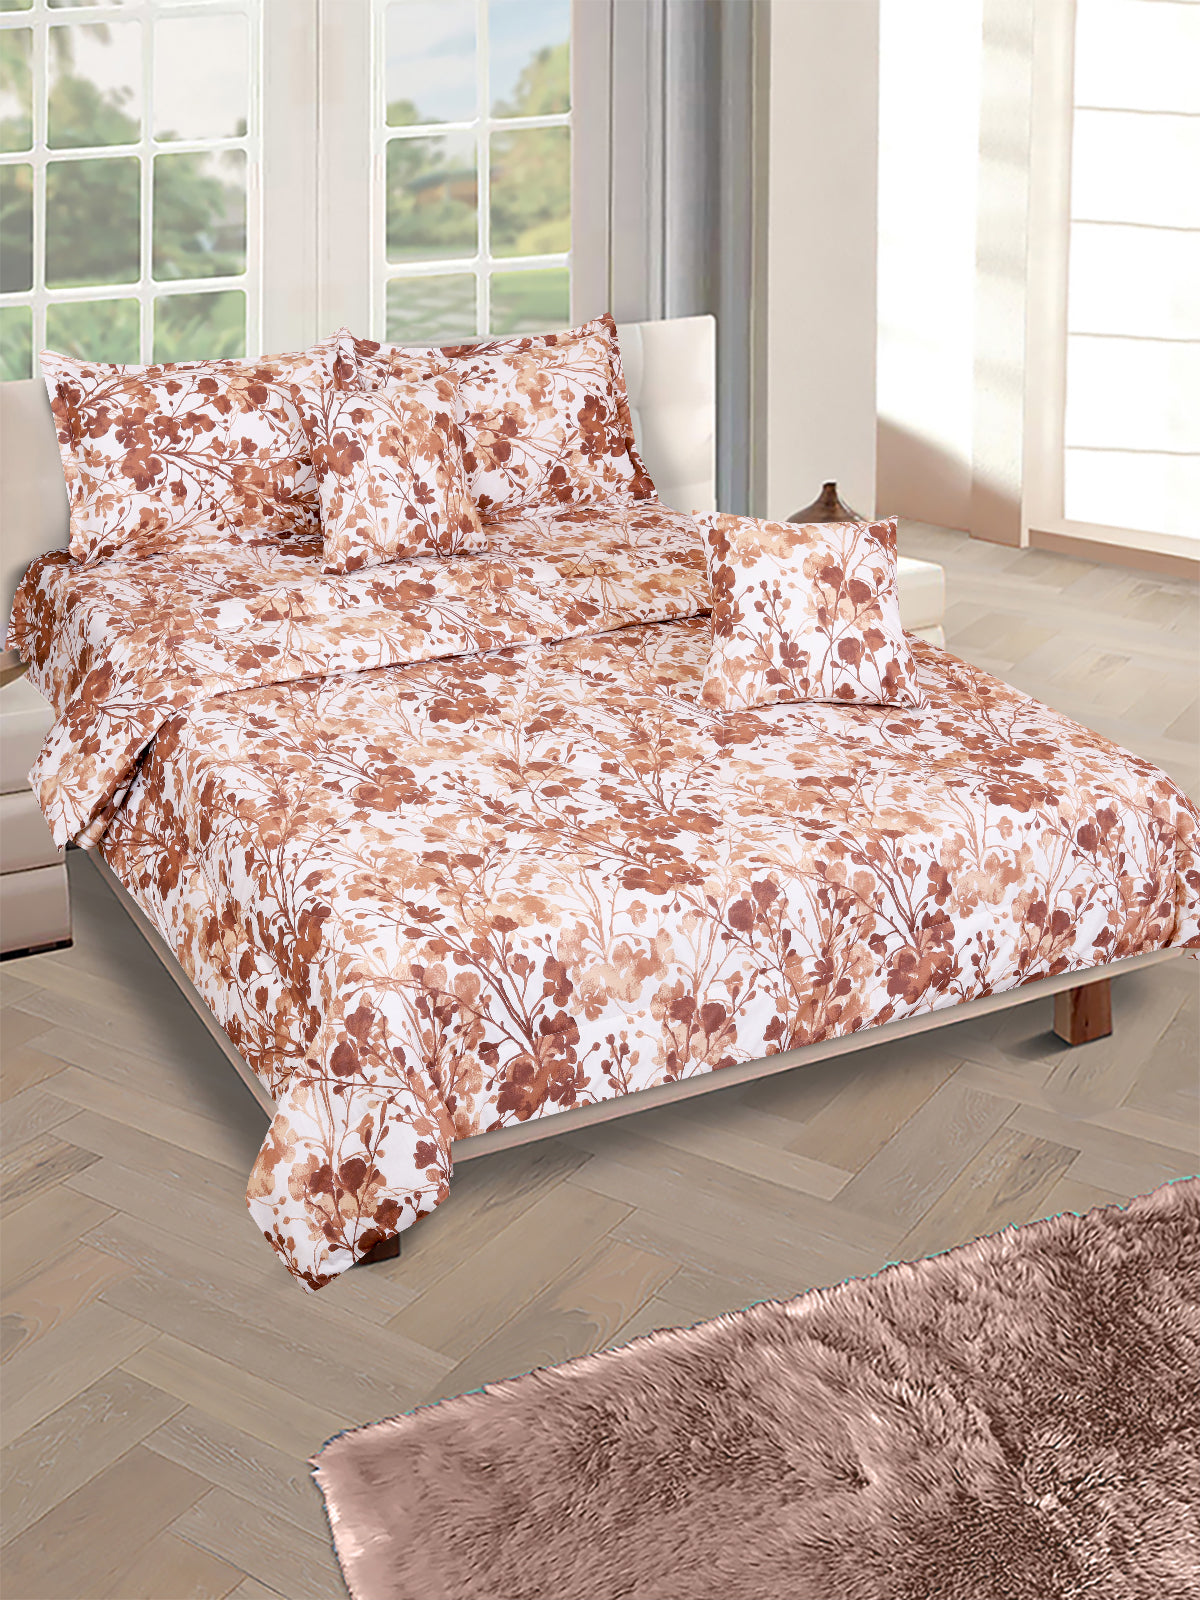 Cream & Brown Floral Printed Cotton Double Queen Bedding Set With Pillow Cover